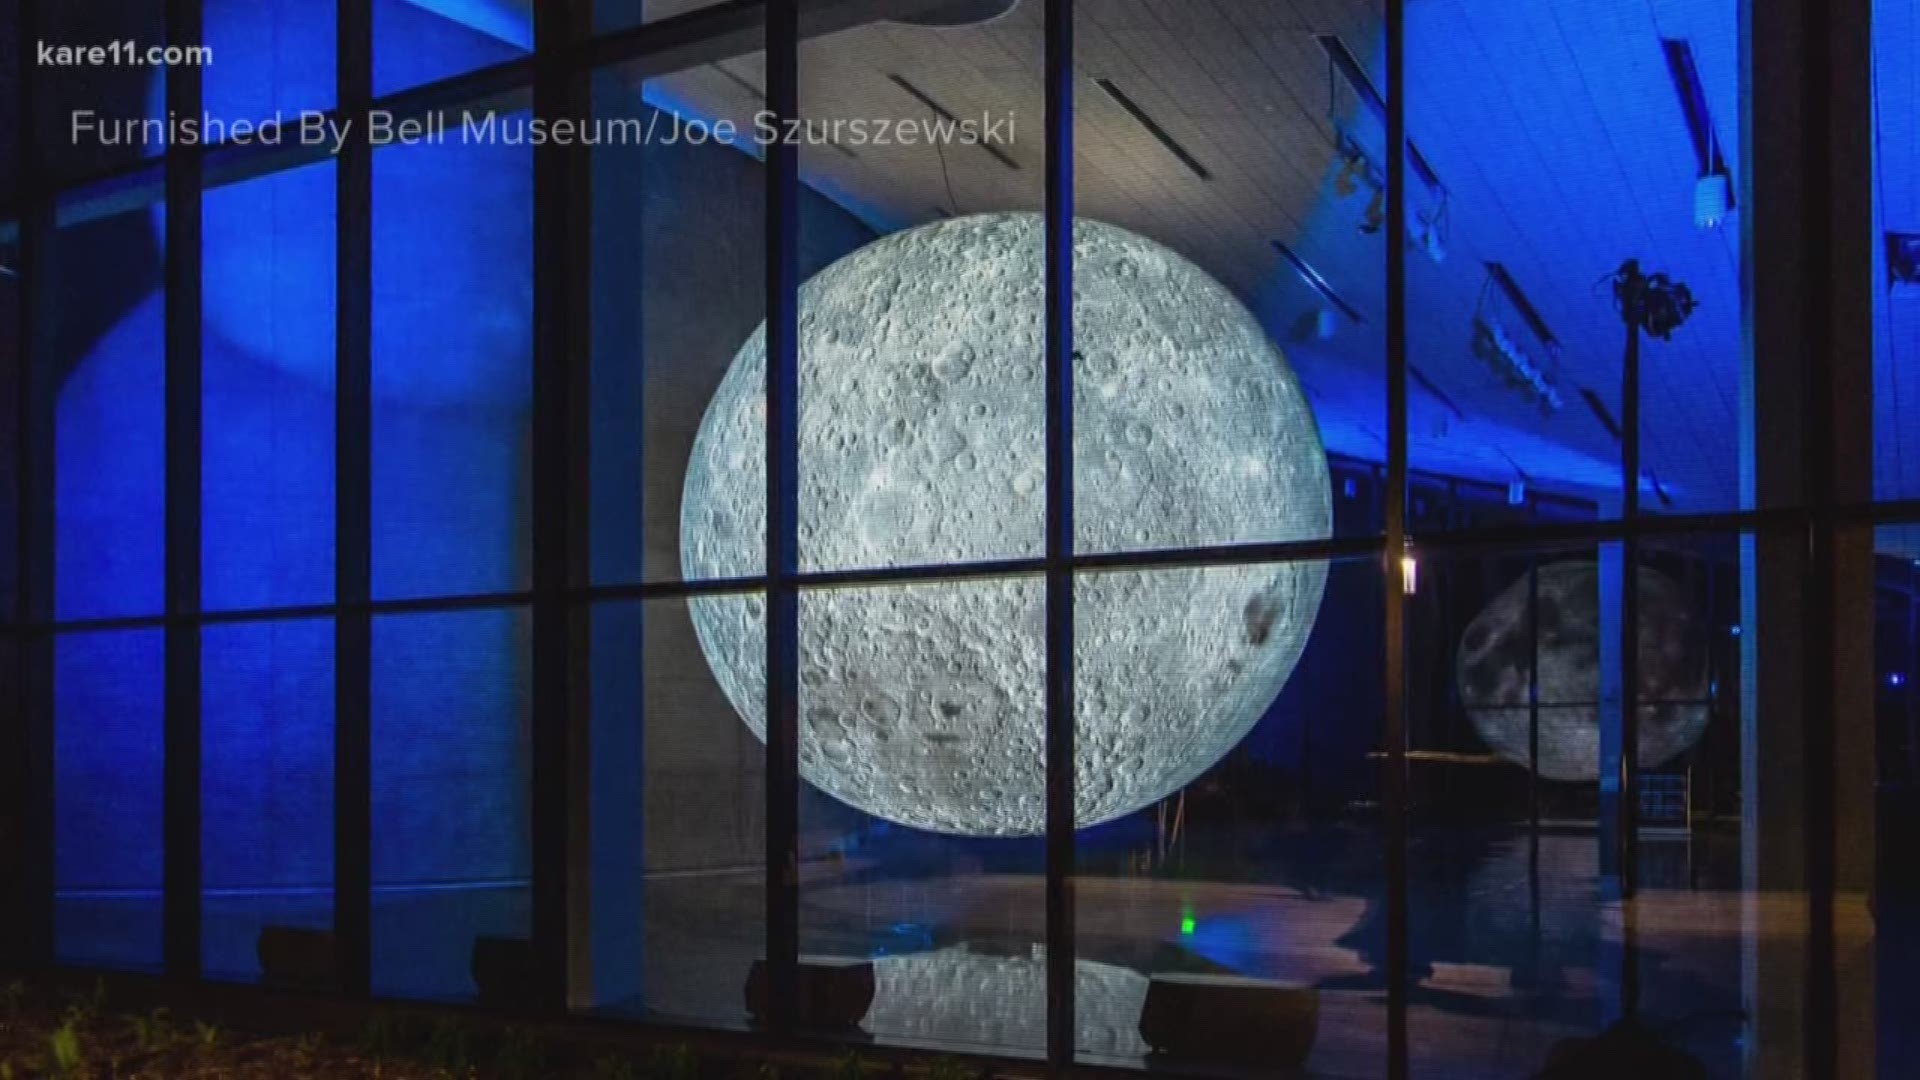 To commemorate the 50th anniversary of the Apollo moon landing, the Bell Museum is hosting a series of special events, including 'Museum of the Moon.'